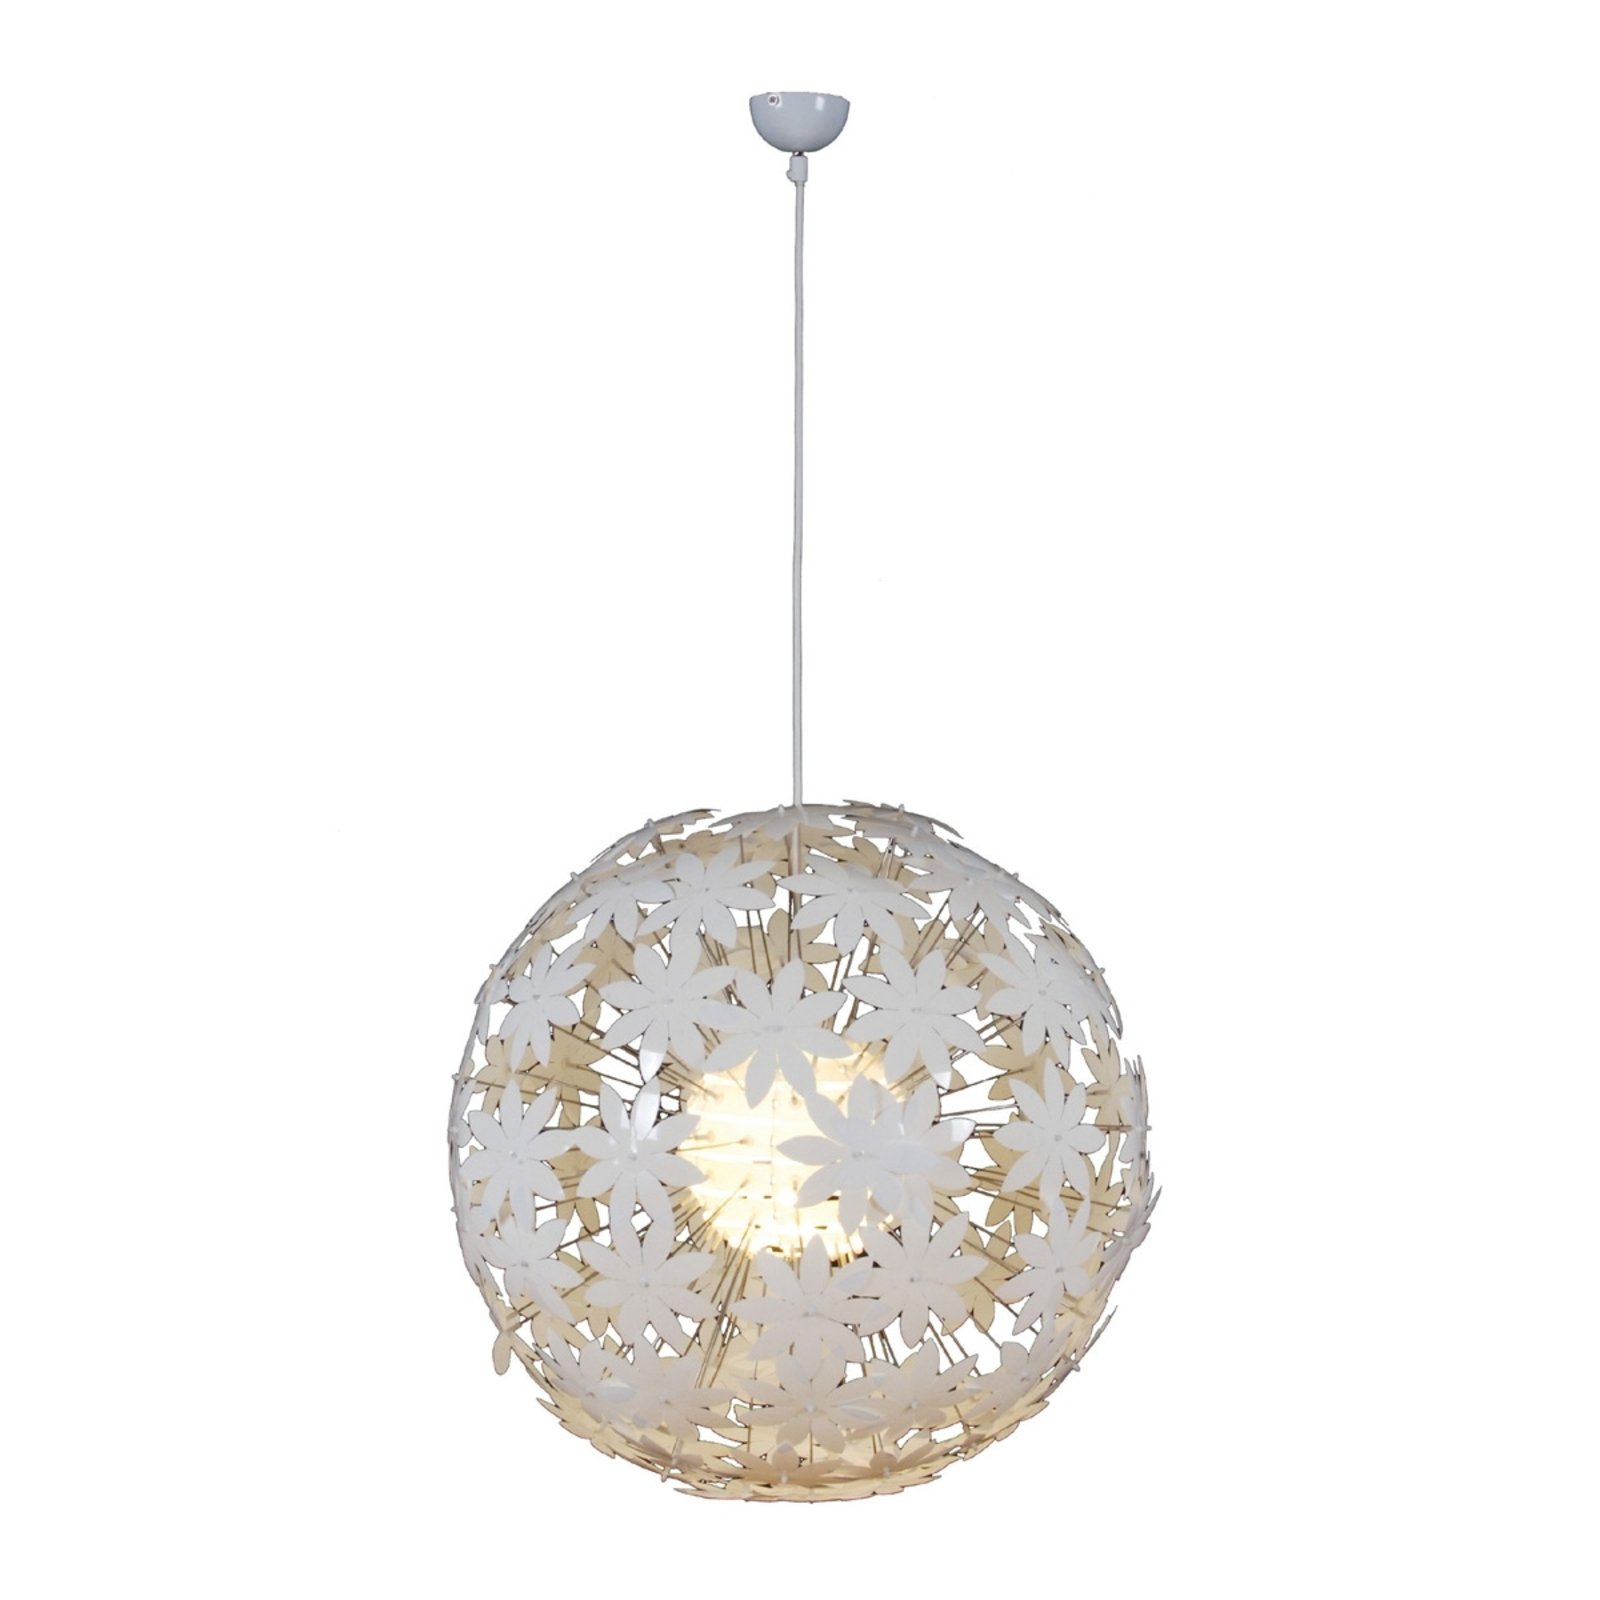 Bolvormige hanglamp YOUNG LIVING wit